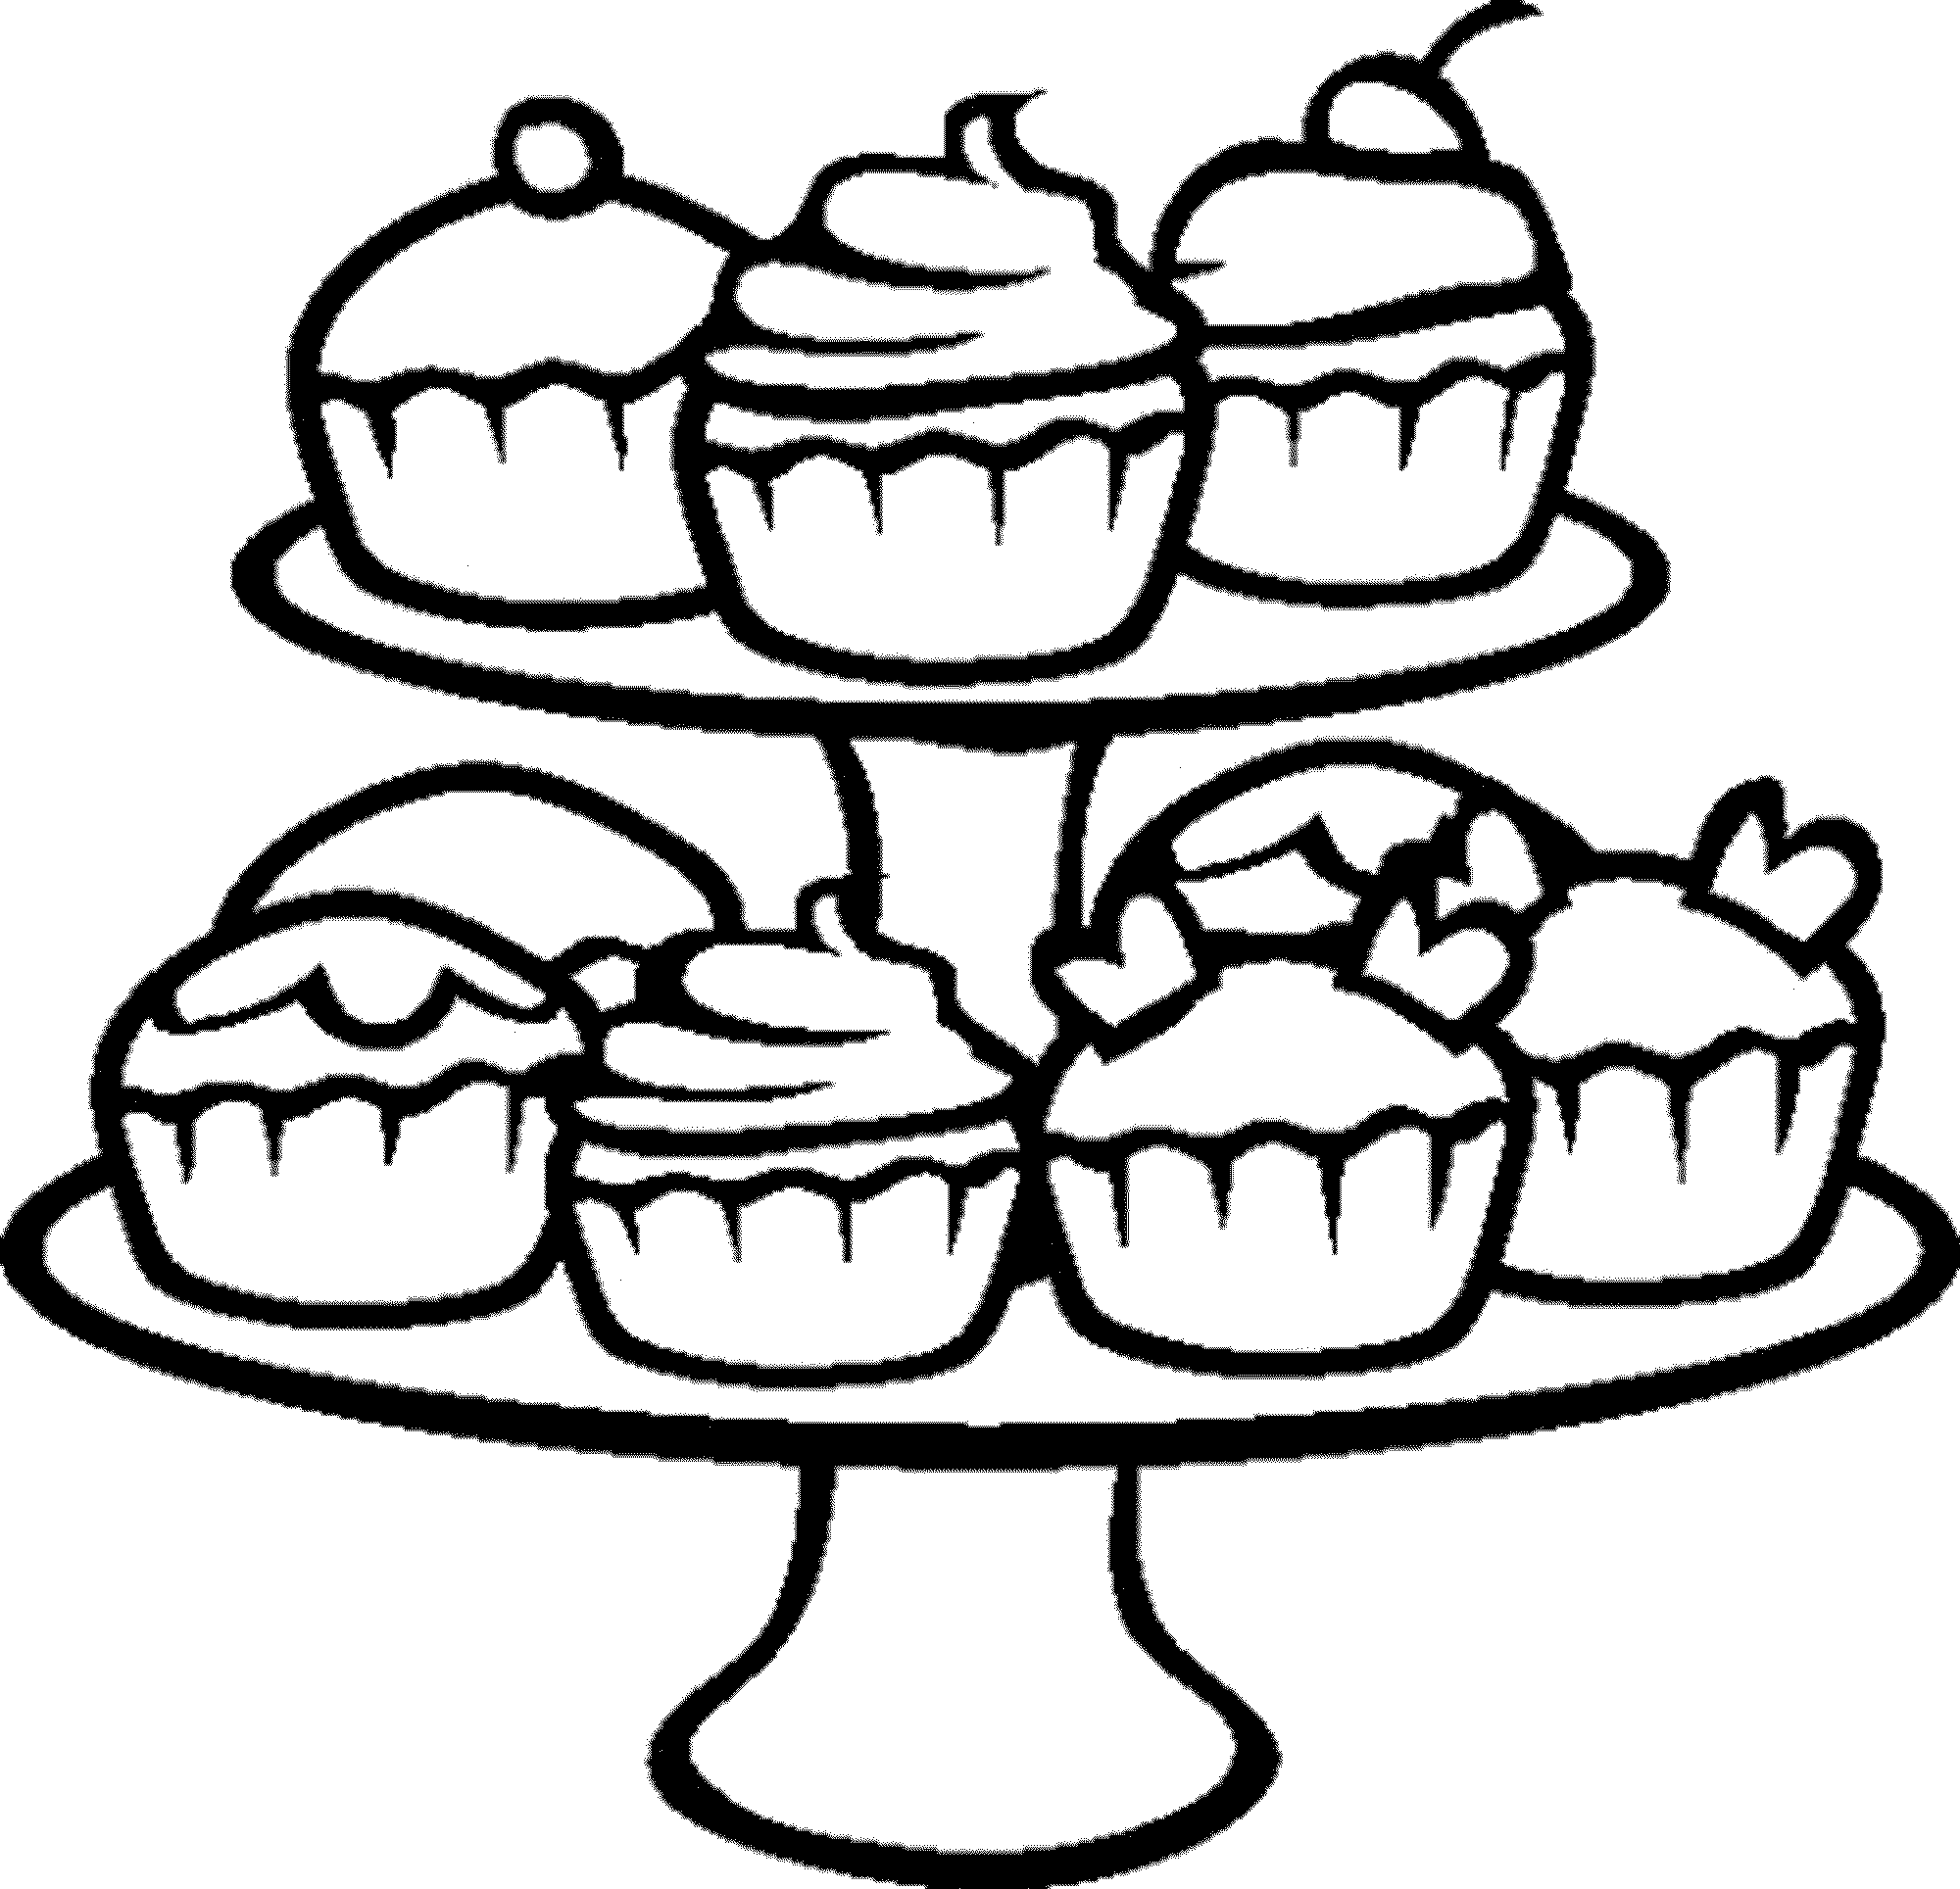 Coloring Cupcakes - Coloring Pages for Kids and for Adults